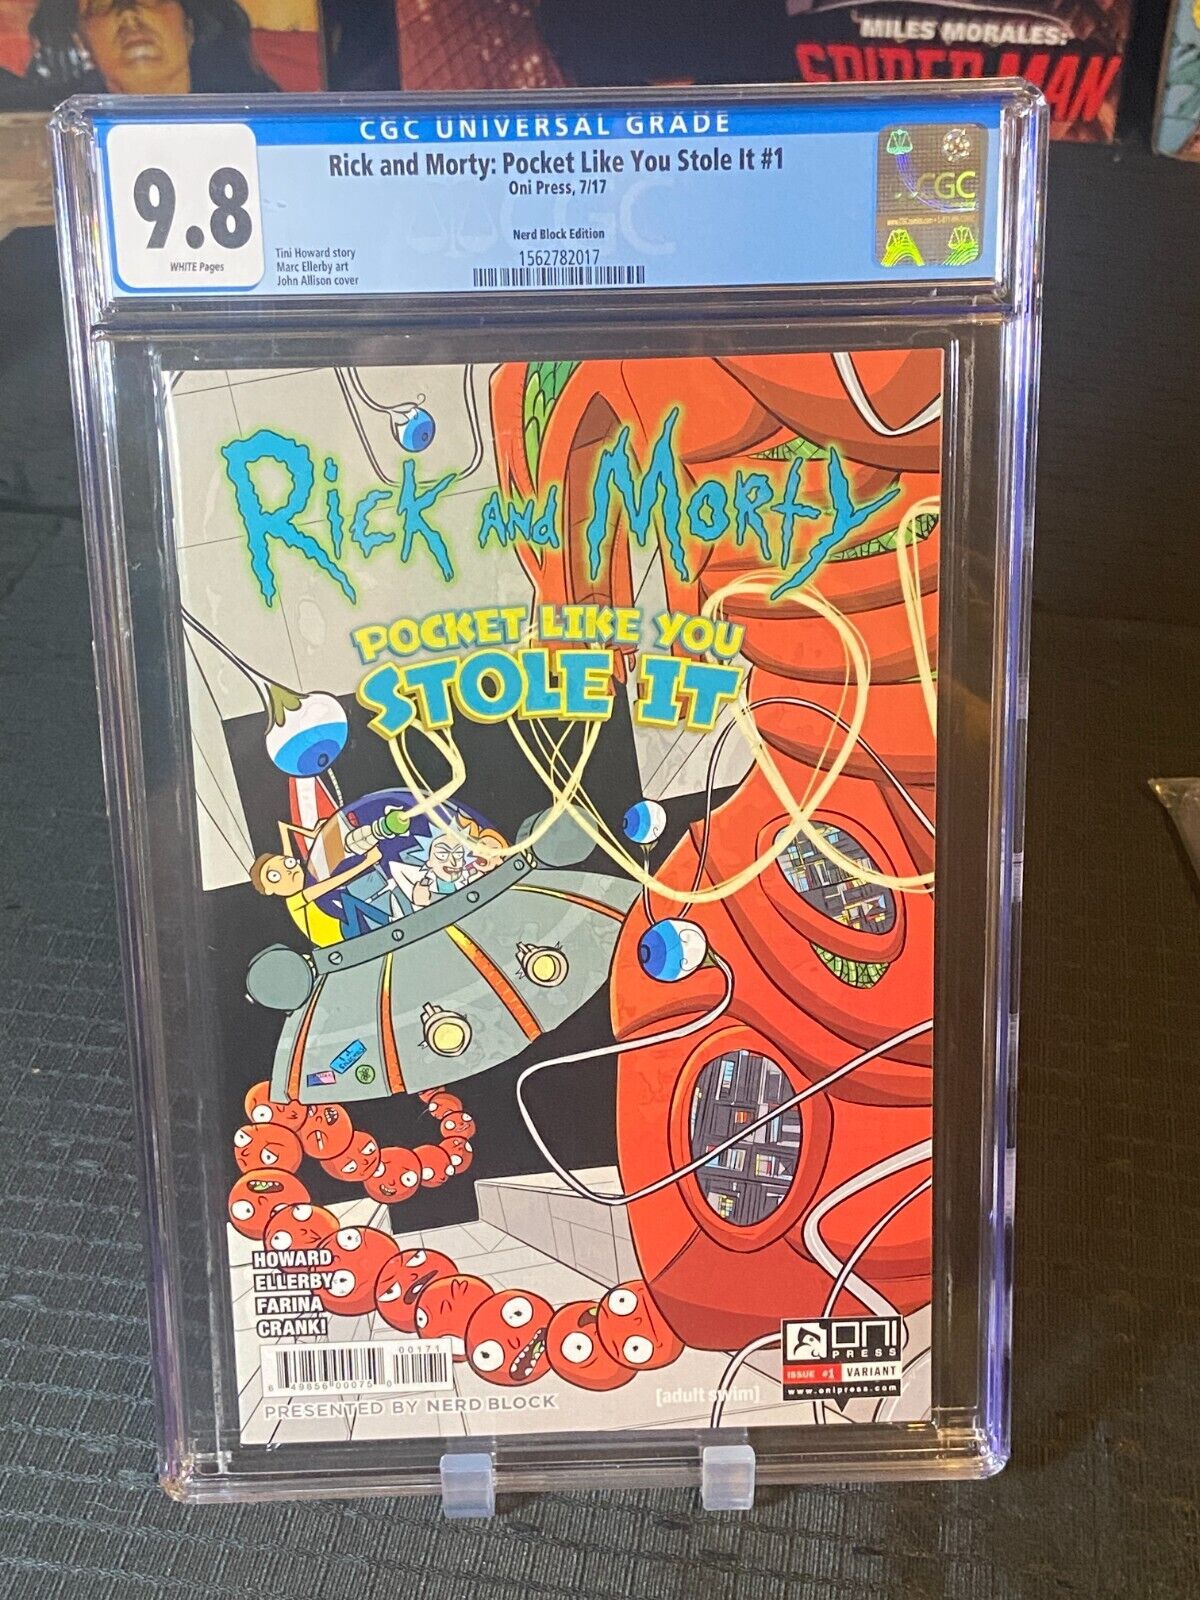 Rick and Morty Pocket Like You Stole It #1 CGC 9.8 Nerd Block Recalled Variant